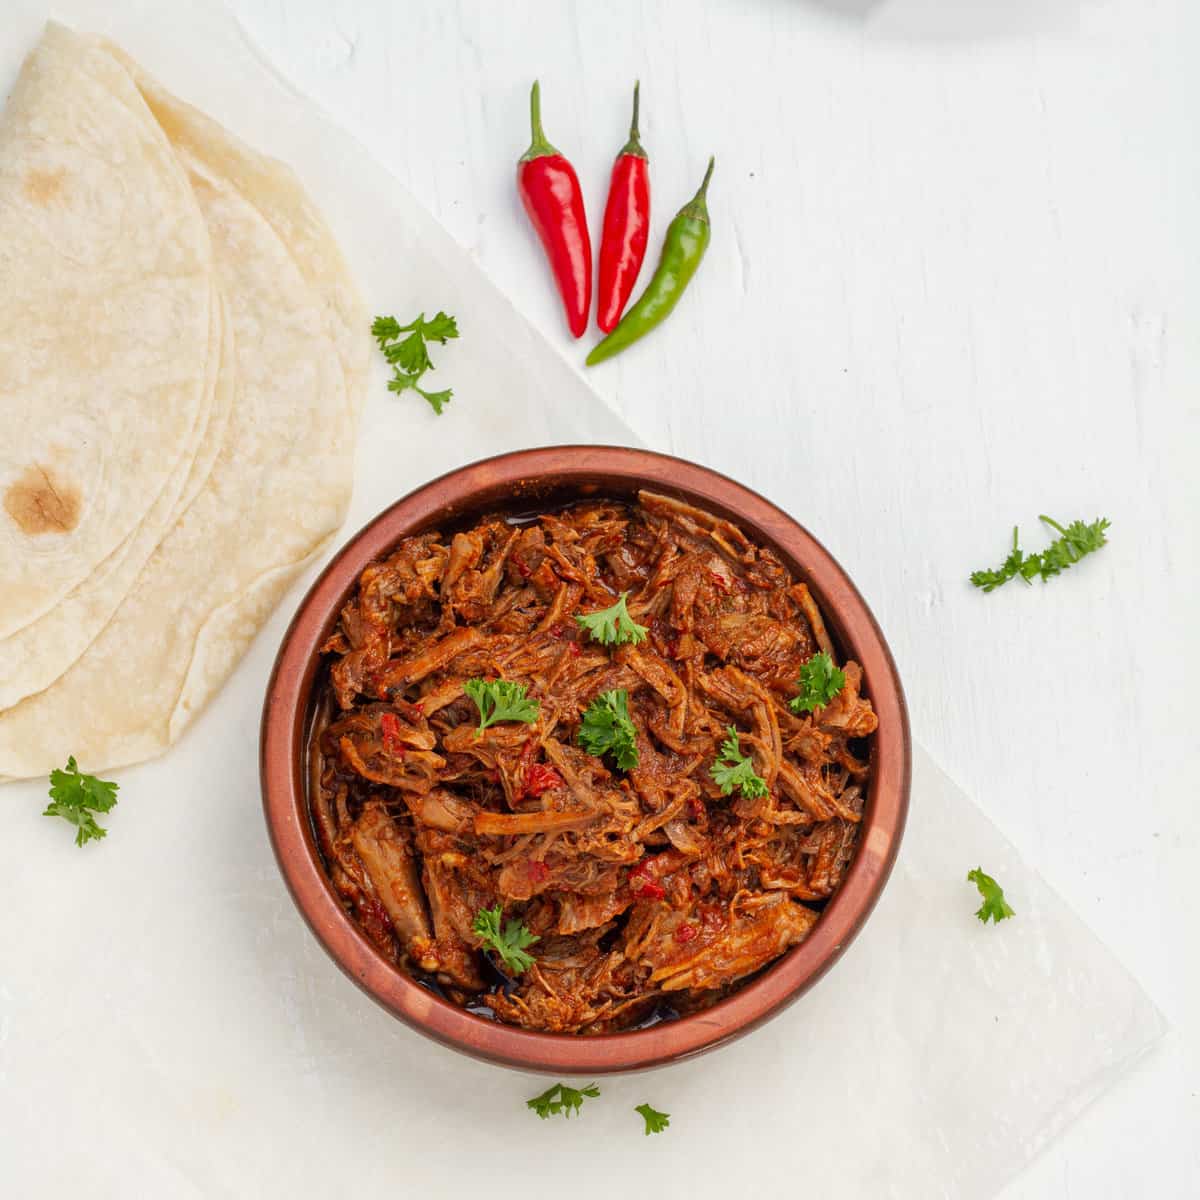 Instant Pot Birria served with chilies and tortillas